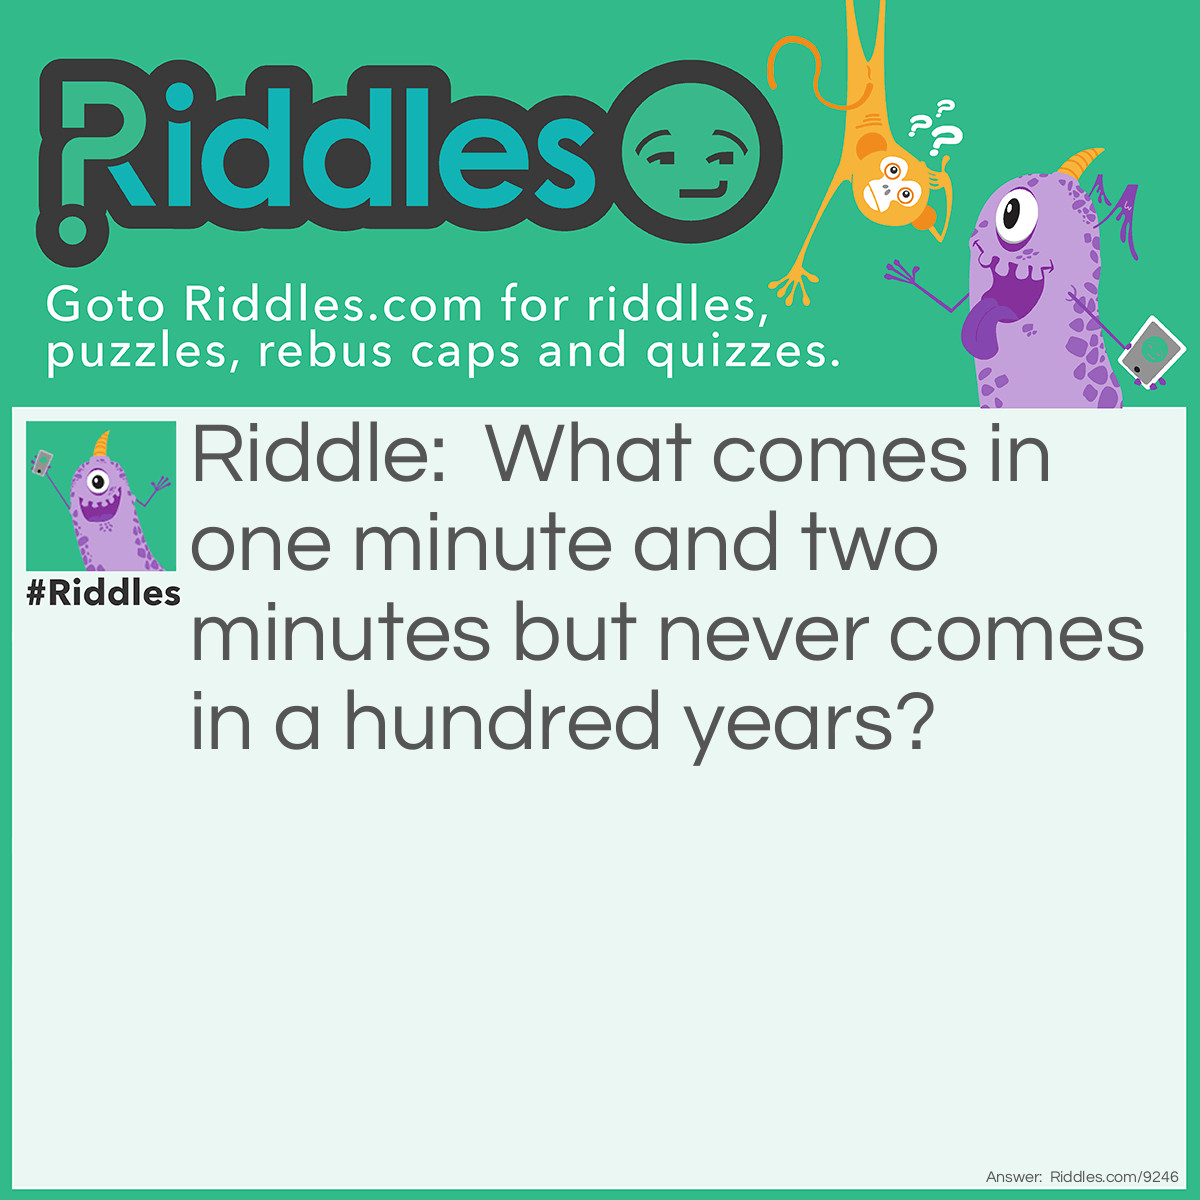 Riddle: What comes in one minute and two minutes but never comes in a hundred years? Answer: O.